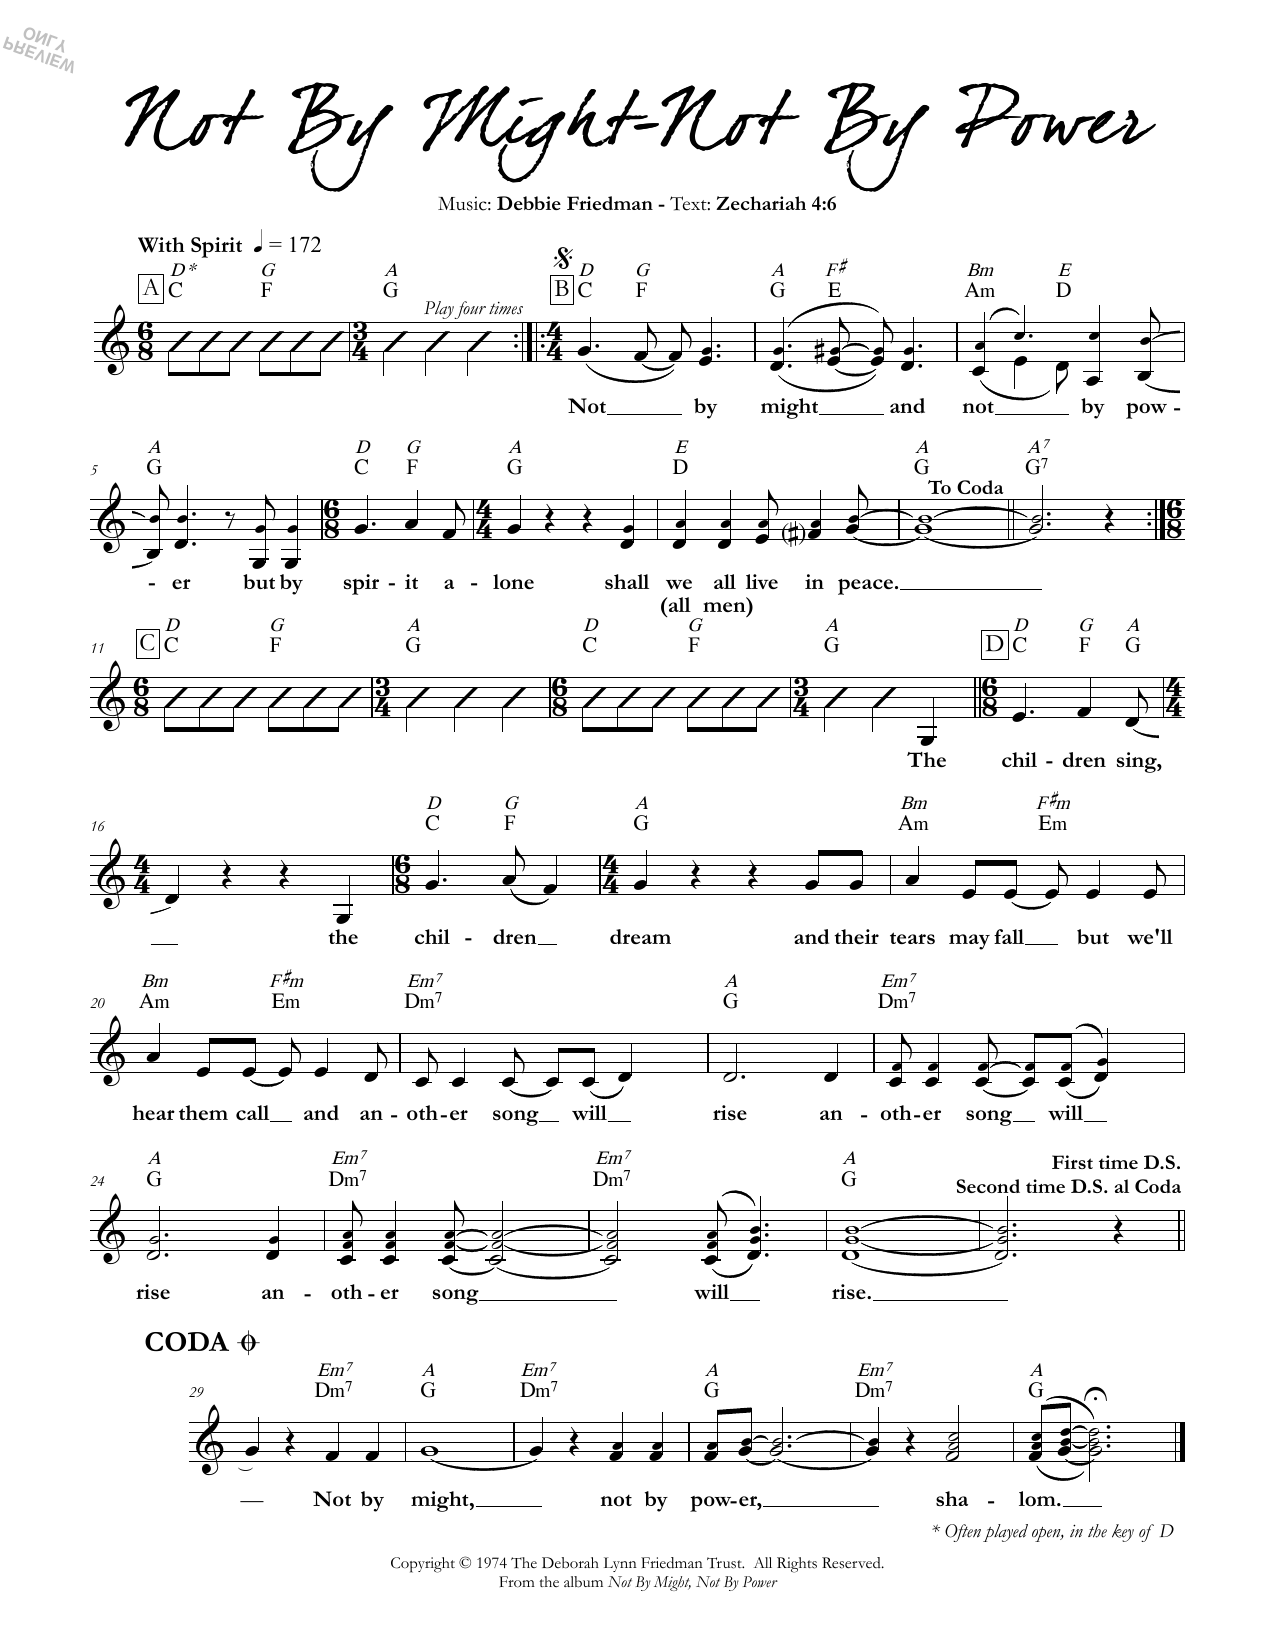 Download Debbie Friedman Not By Might - Not By Power Sheet Music